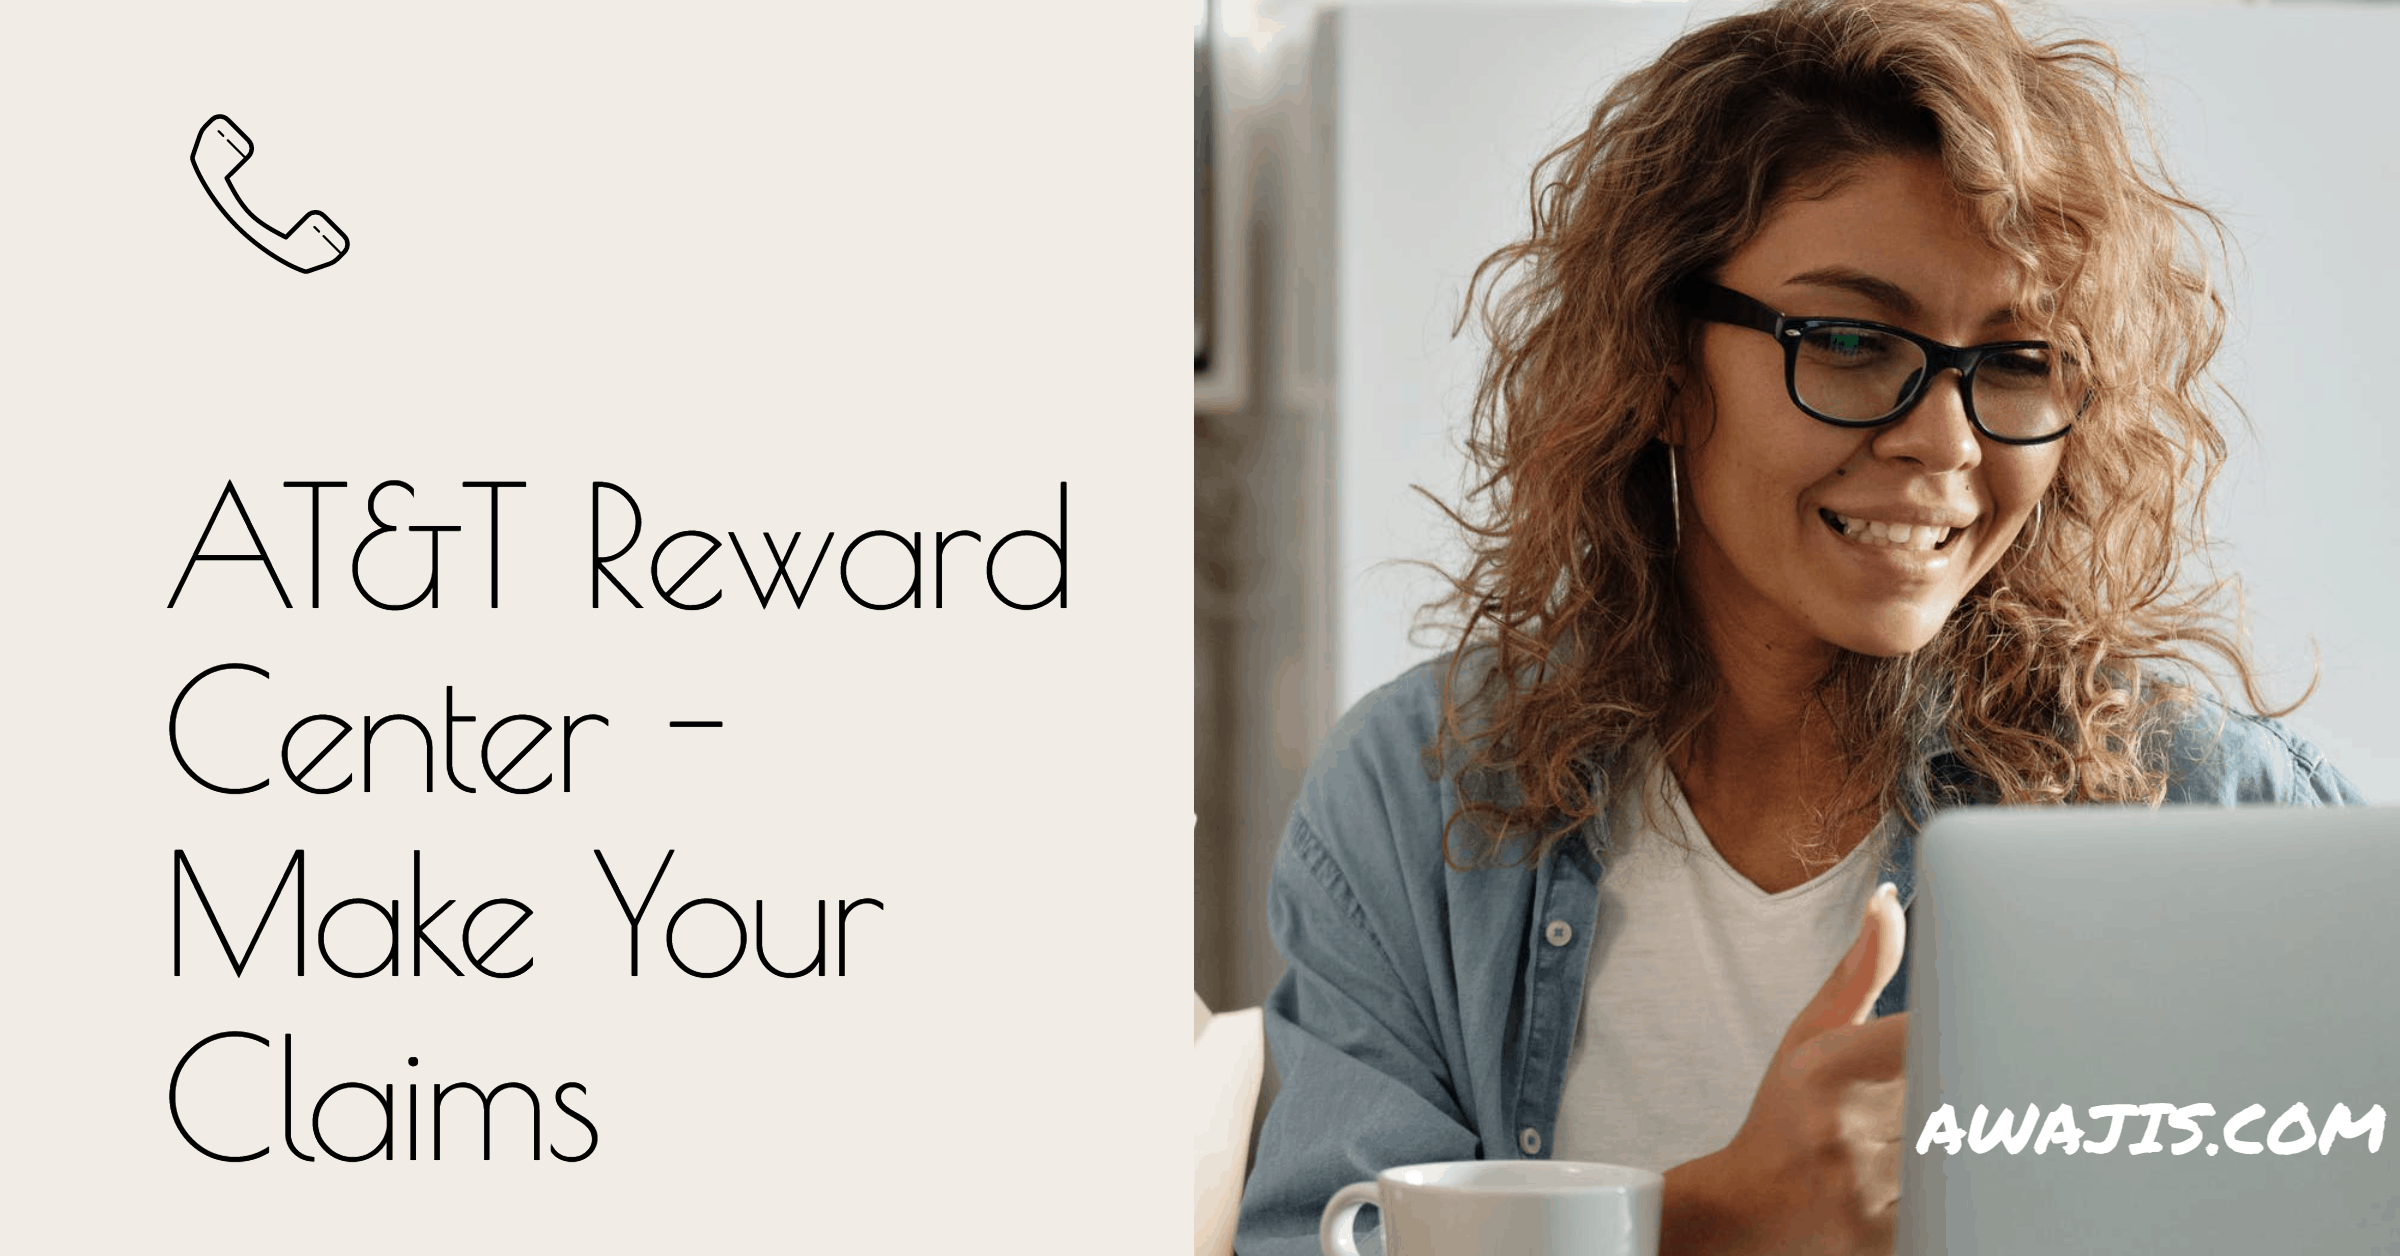 AT T Reward Center How To Make Your Claim At AT And T Rewards Center